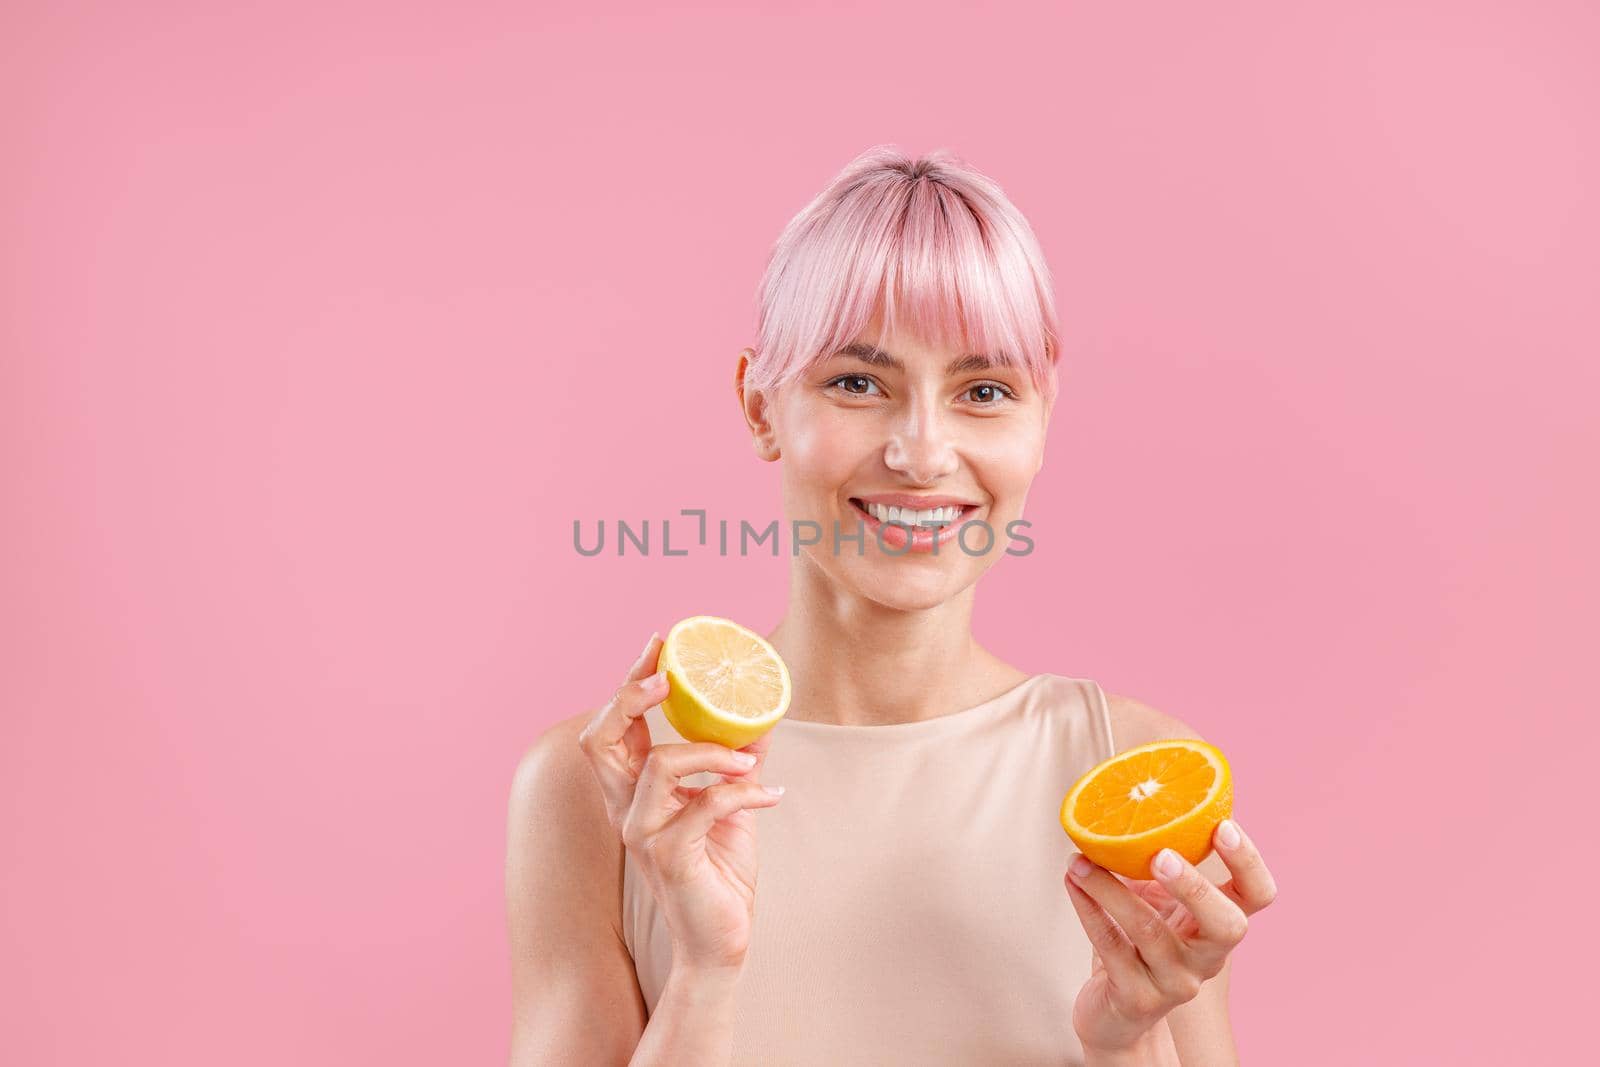 Portrait of smiling woman with pink hair holding half of fresh orange and lemon, posing isolated over pink background. Beauty, healthy eating concept